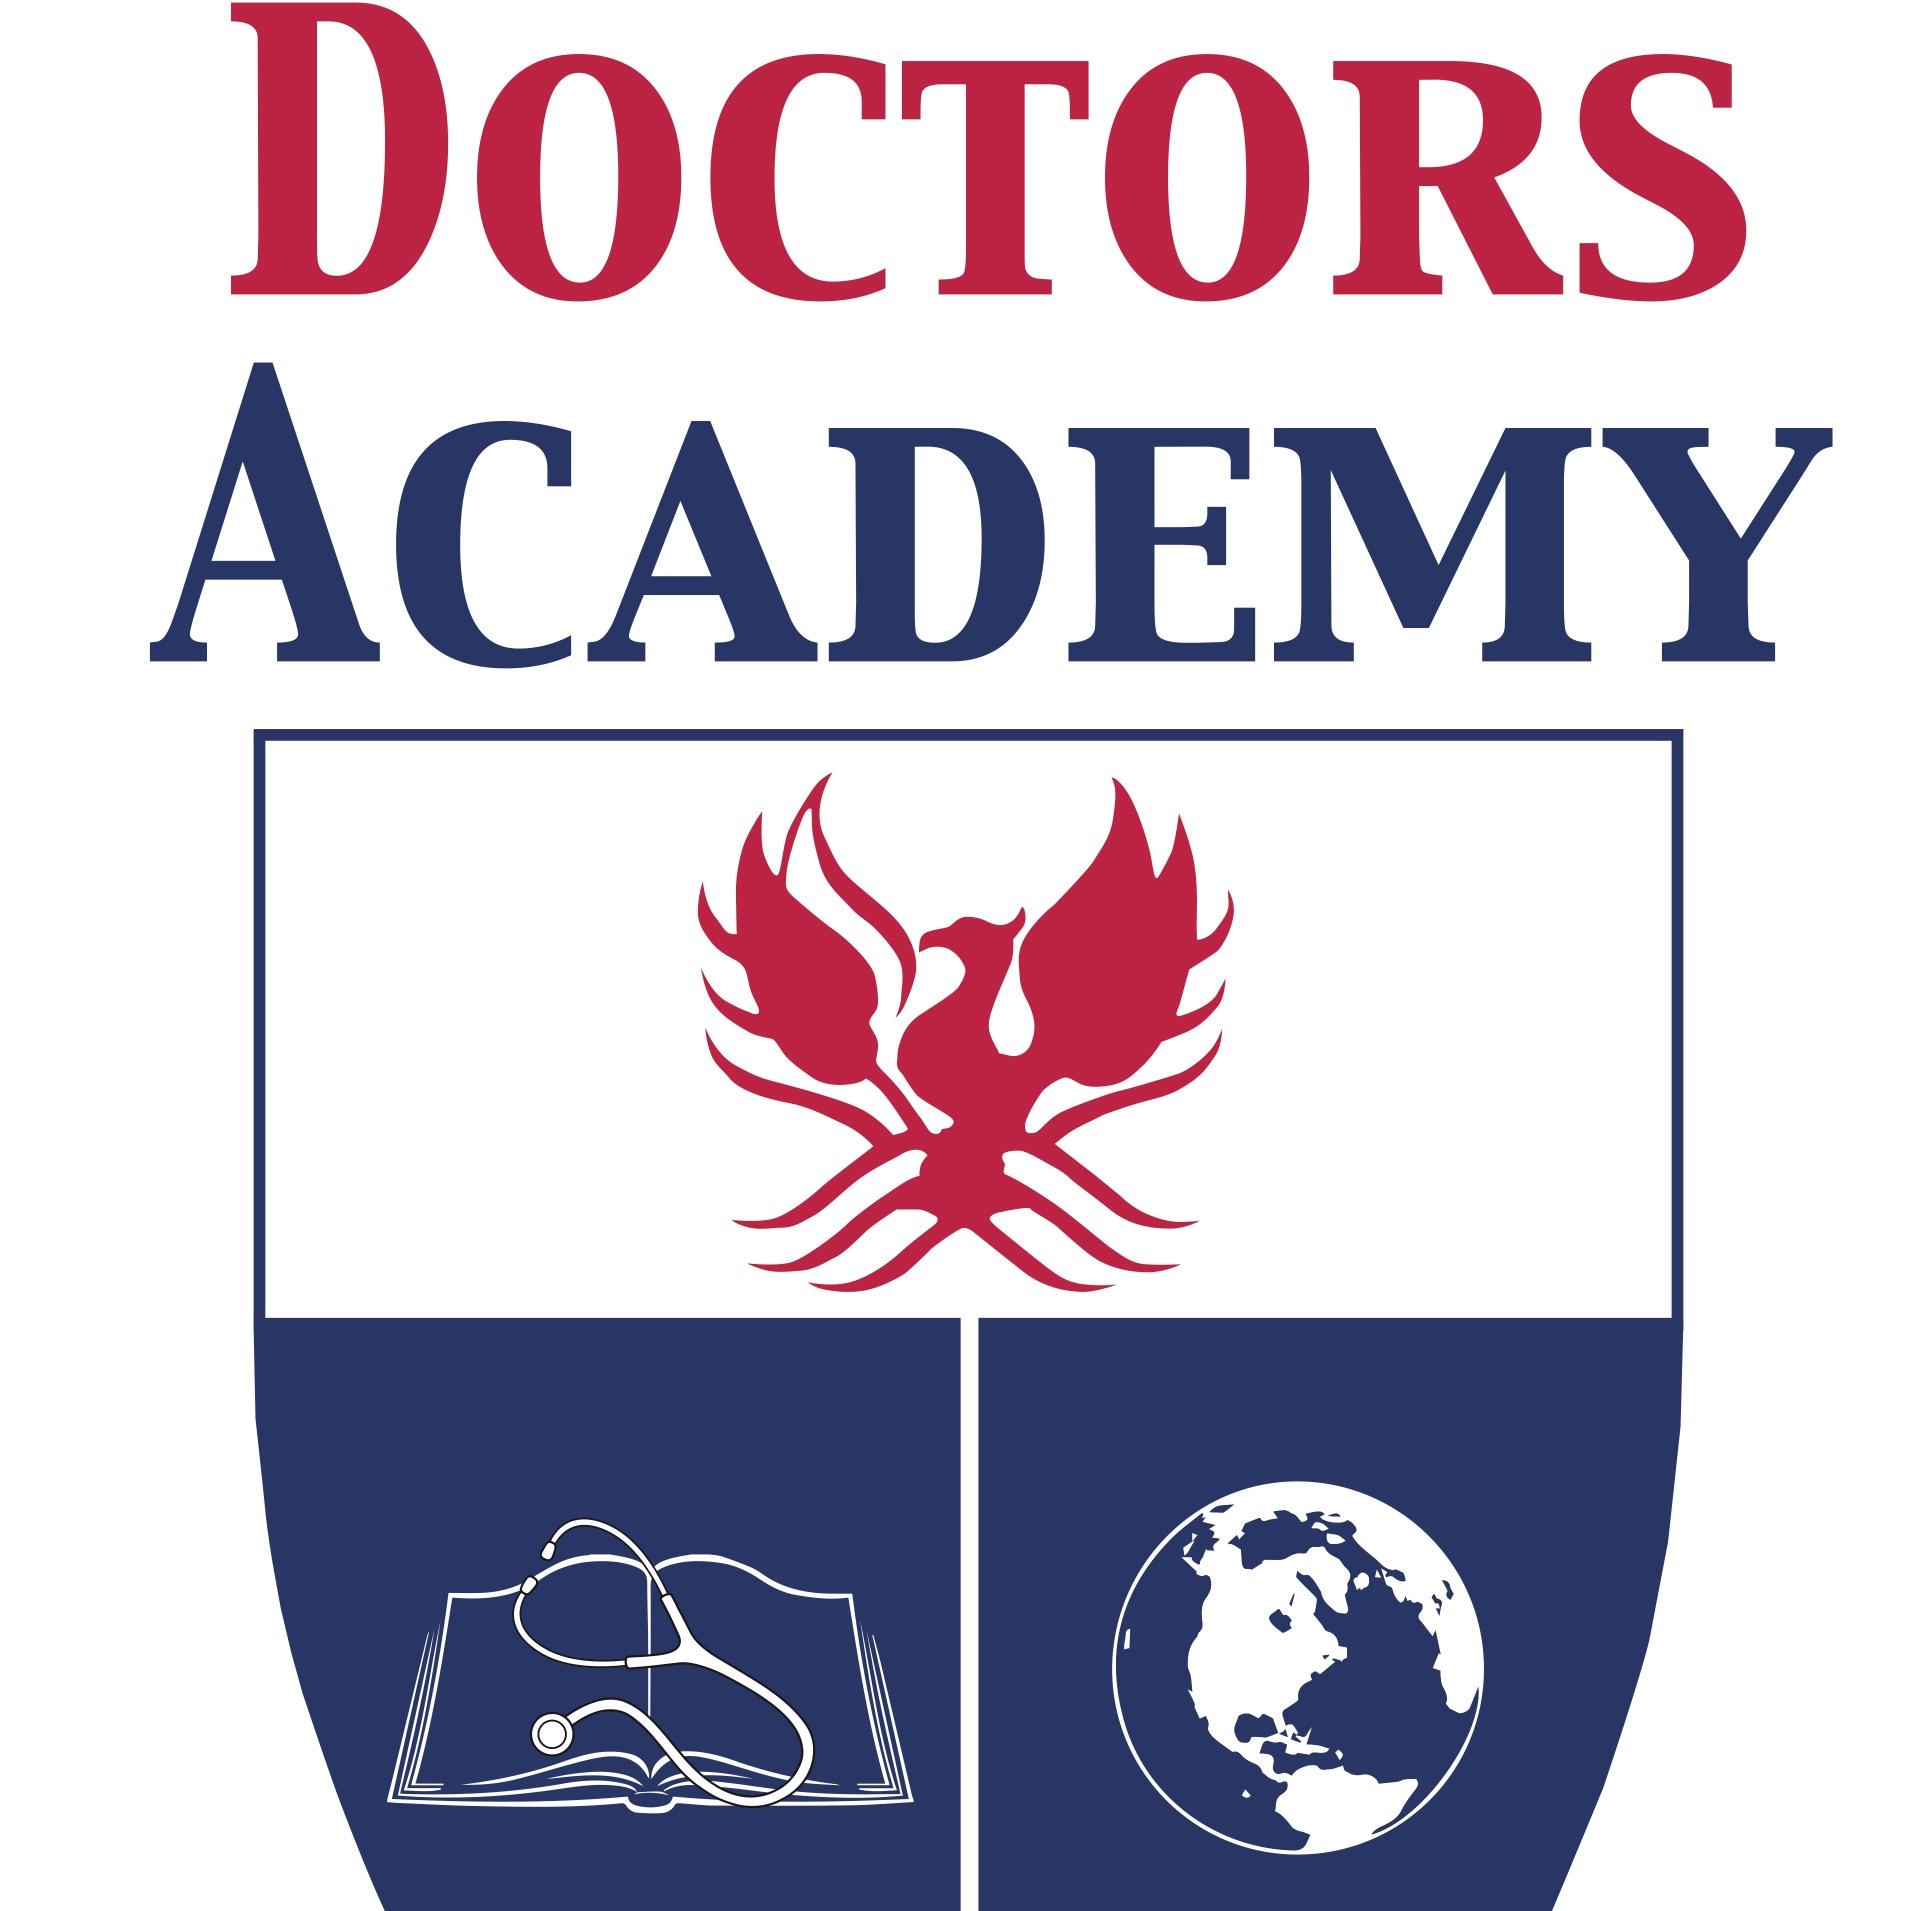 Doctors Academy Group of Educational Divisions